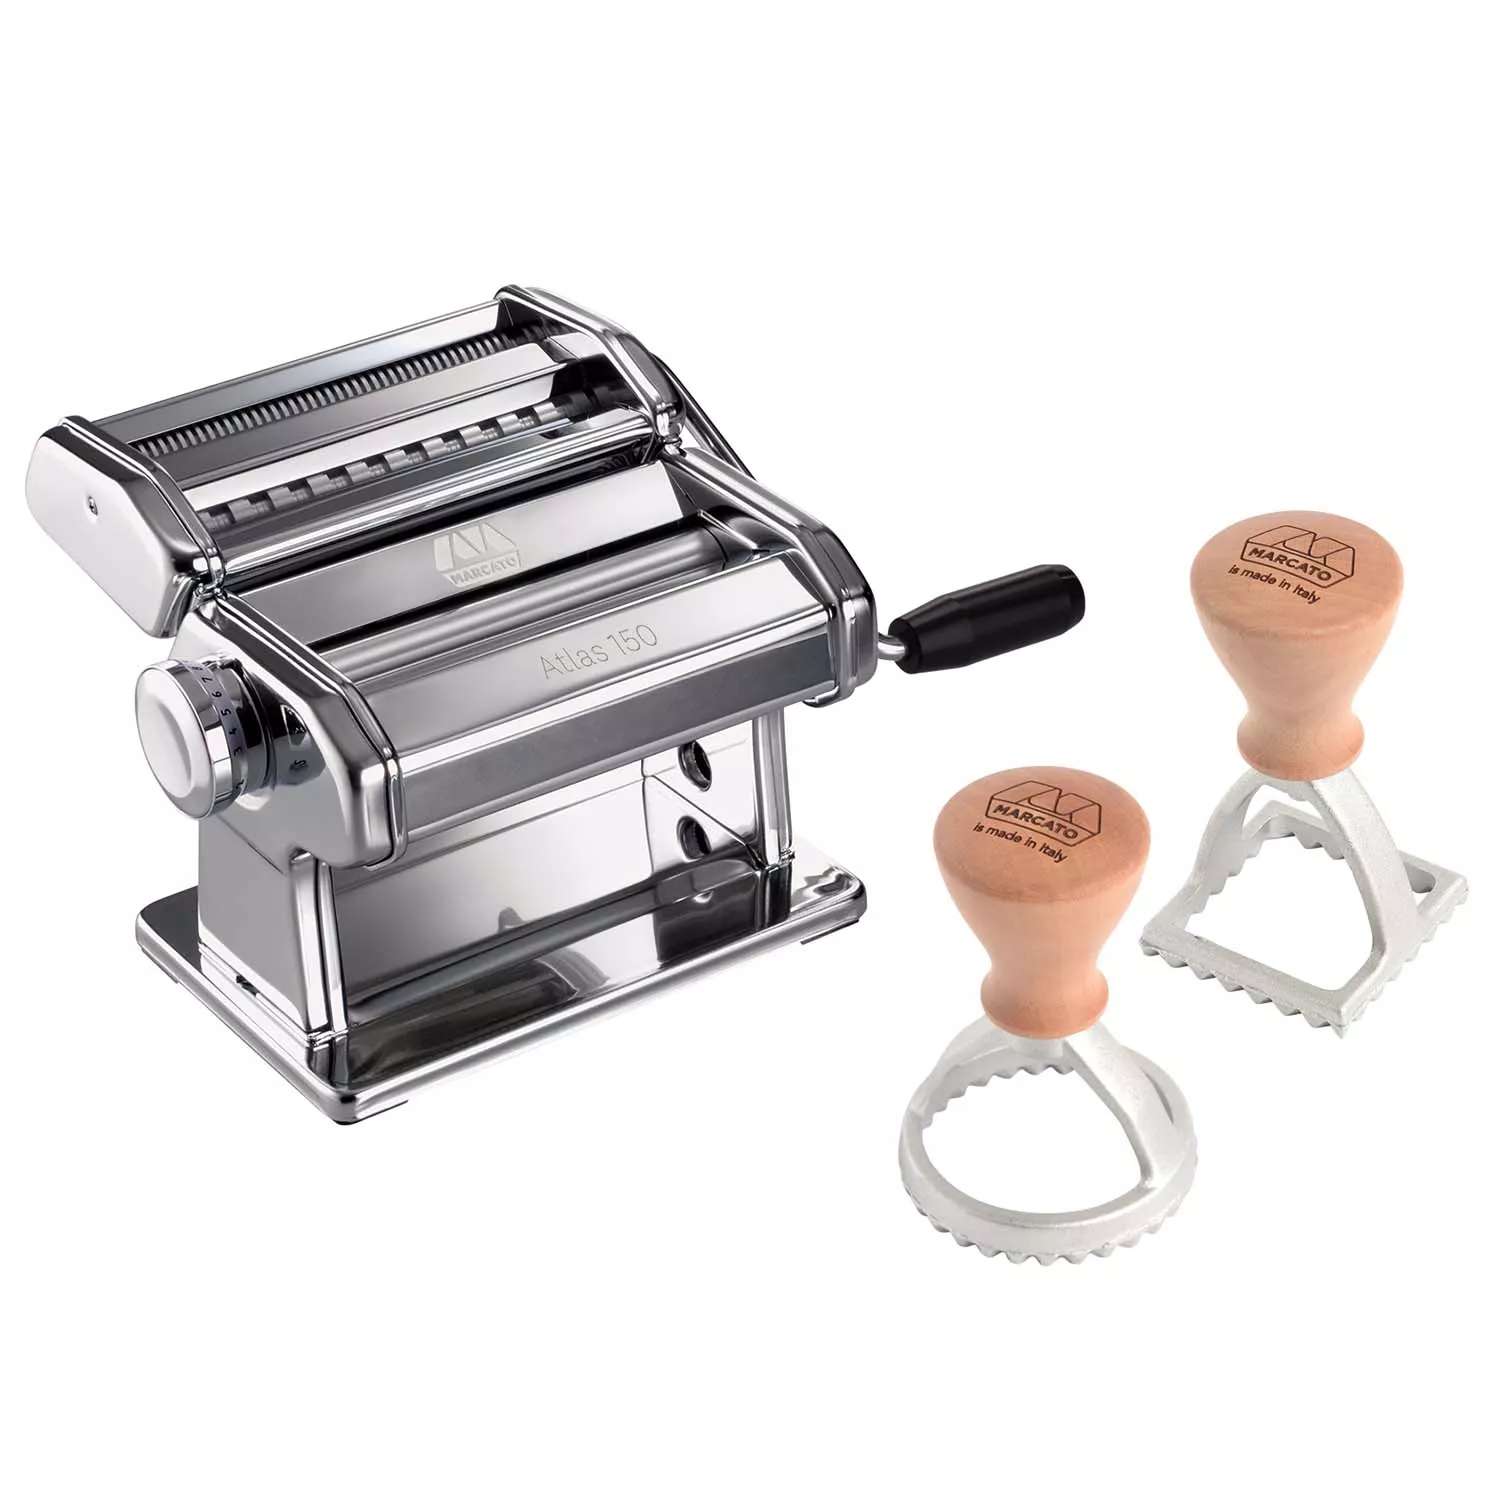 Marcato Atlas 150 Countertop Pasta Machine From Italy: Review